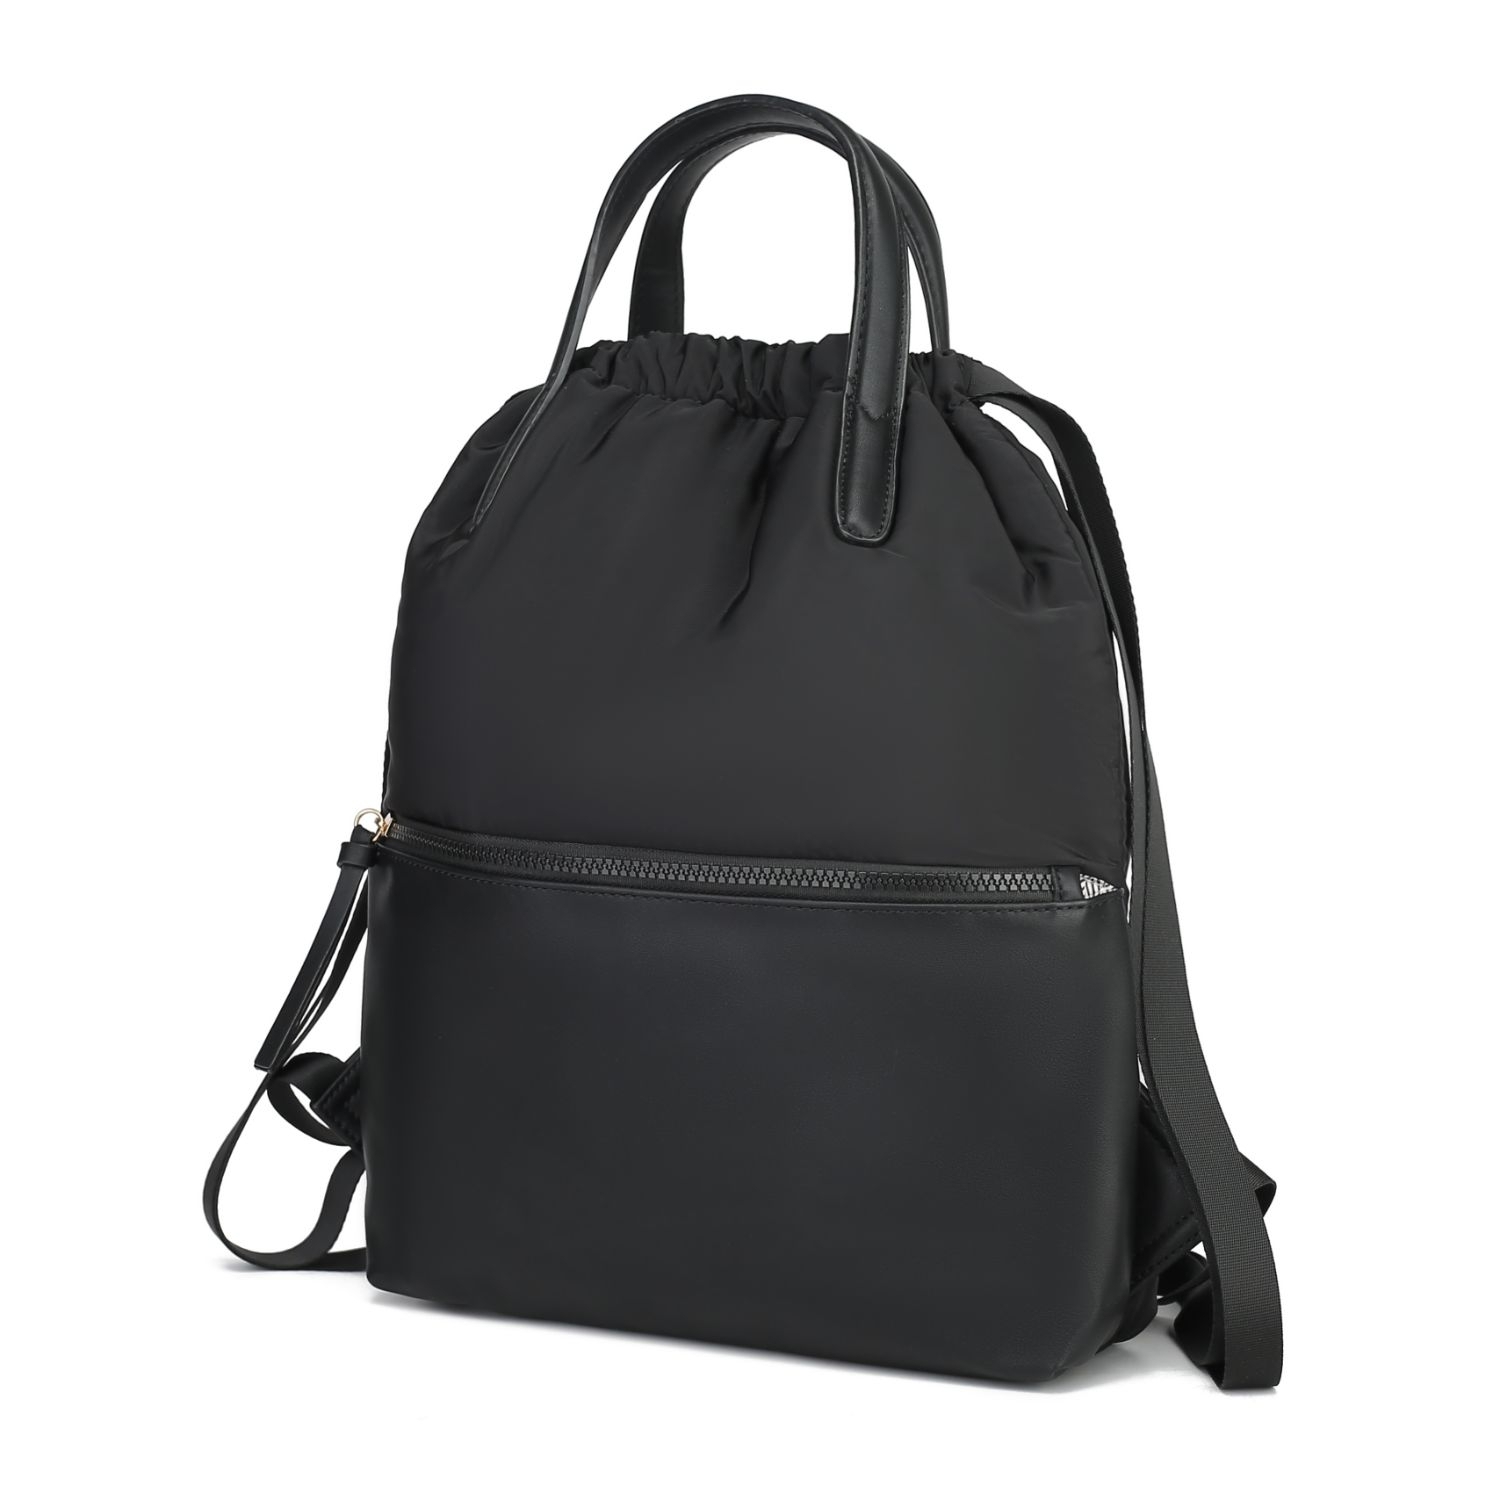 MKF Collection Lexi Packable Backpack By Mia K. - Wine